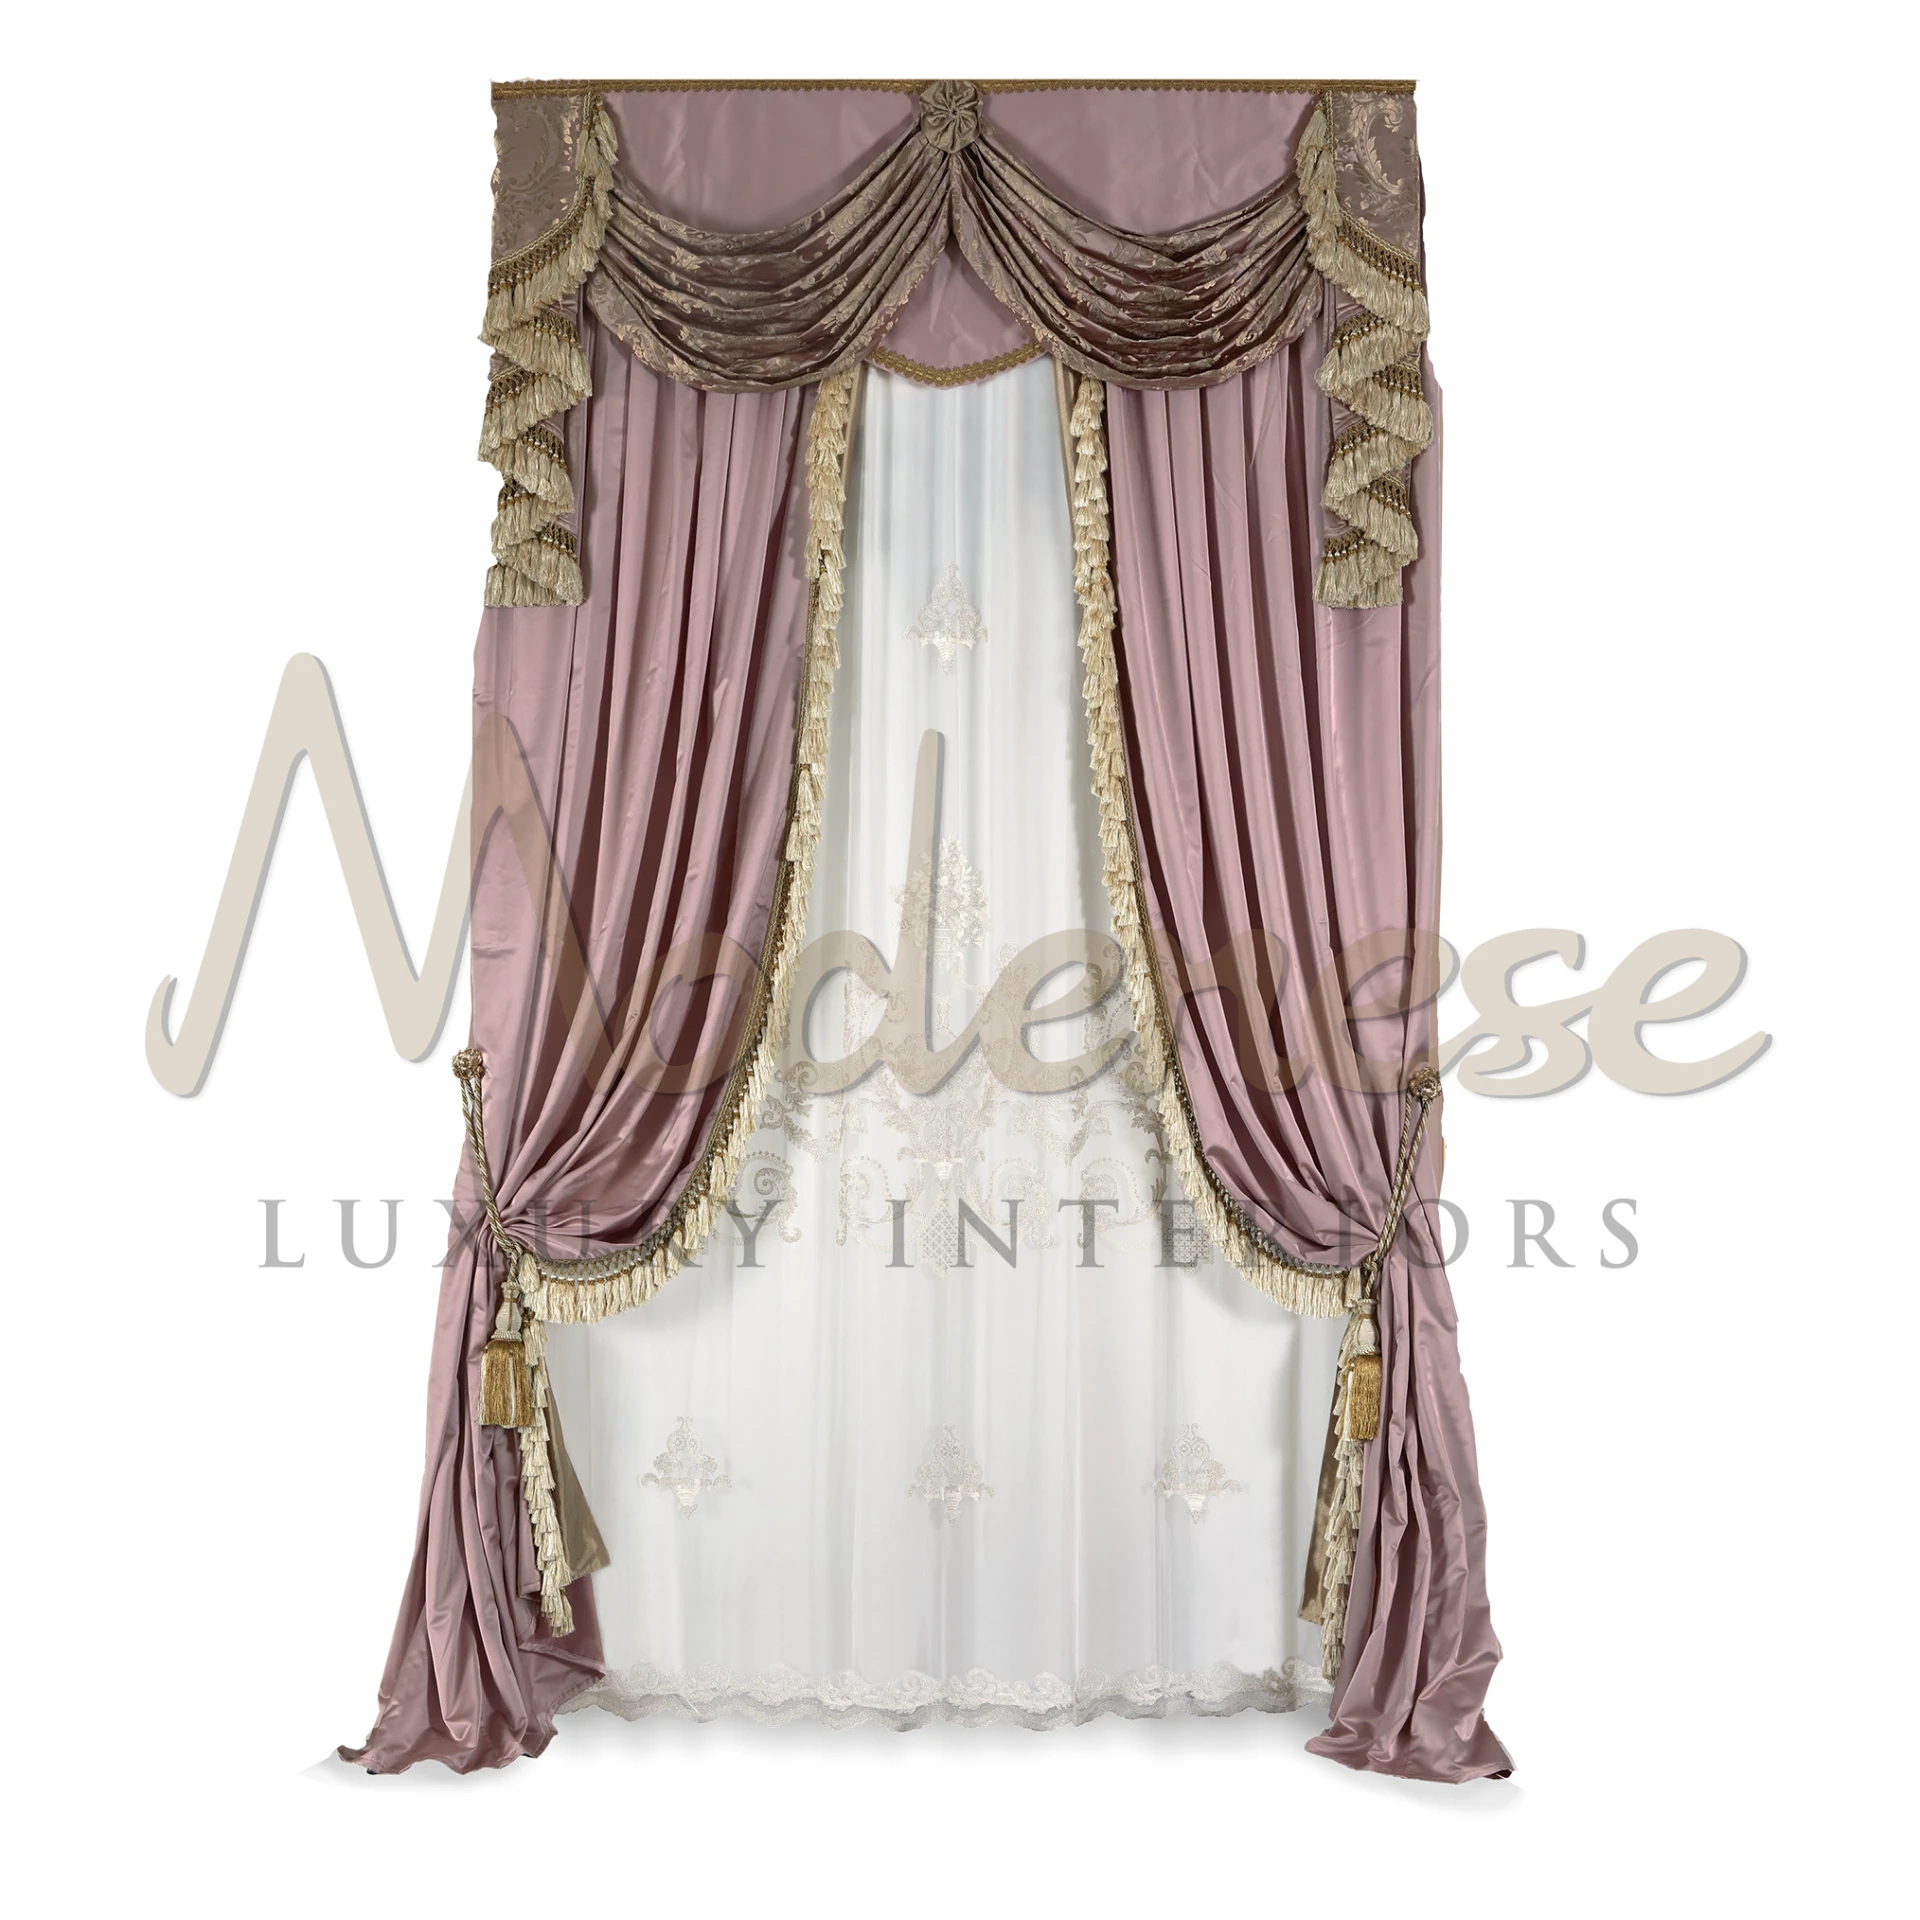 Classical Silk Curtains with a smooth, luxurious drape, enhancing the room's ambiance with their subtle and elegant sheen.